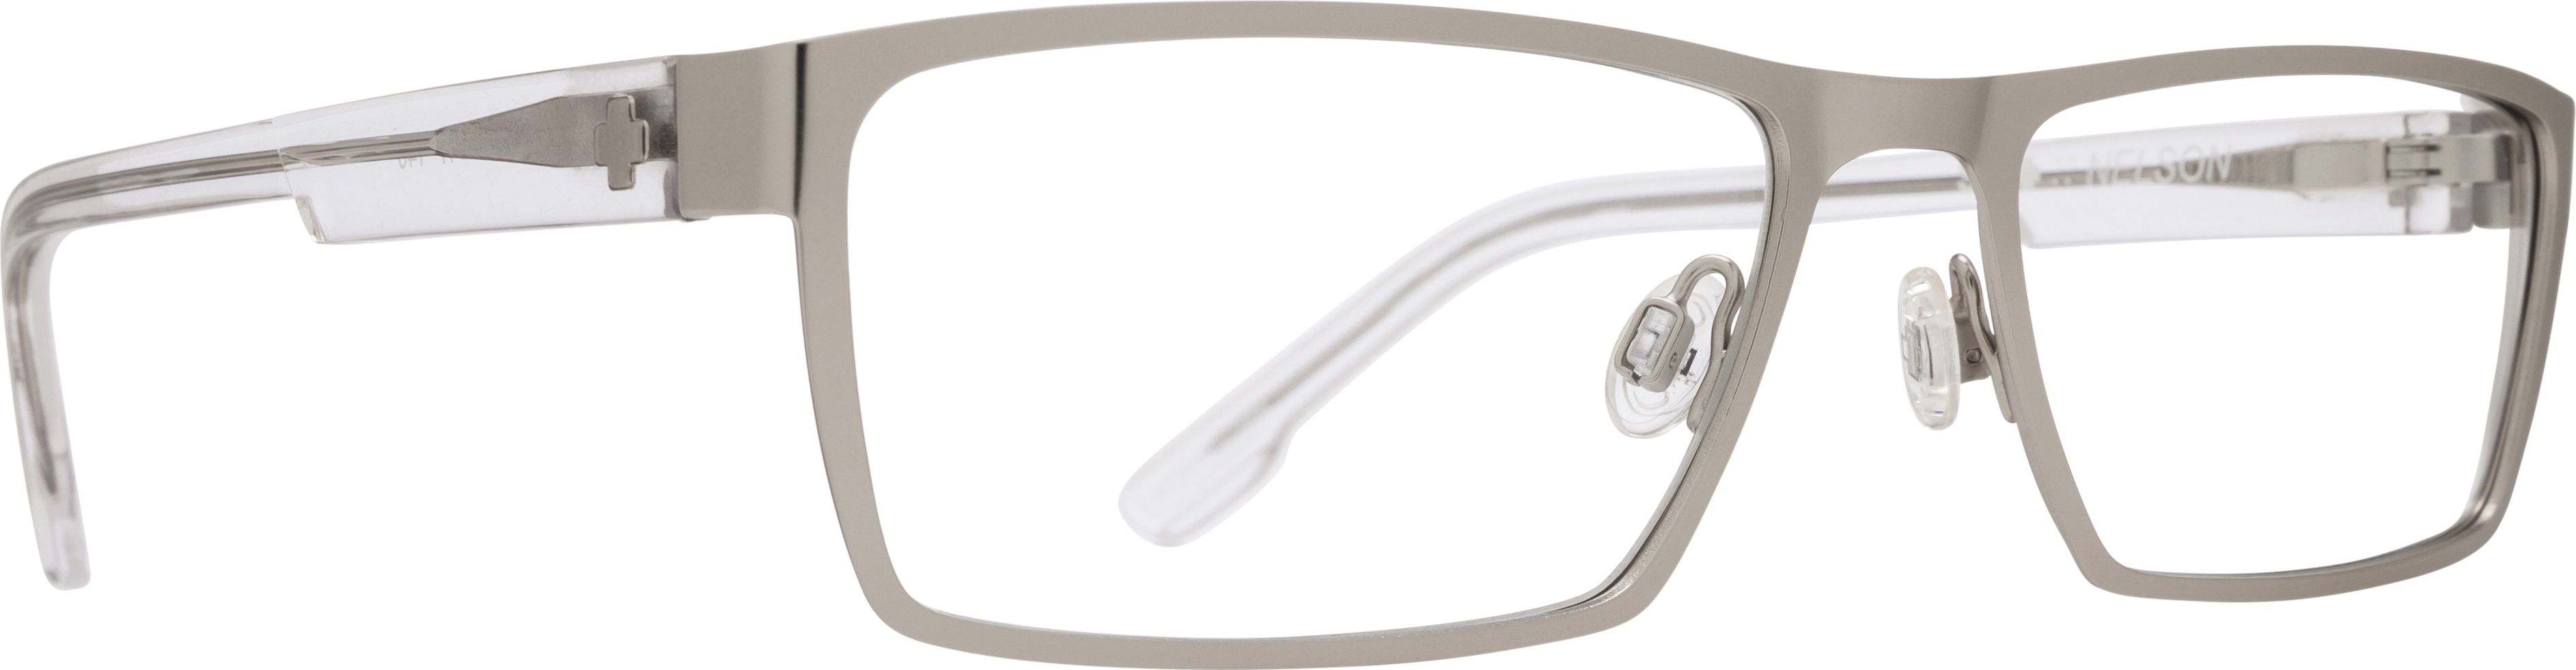 Picture of Spy Eyeglasses NELSON